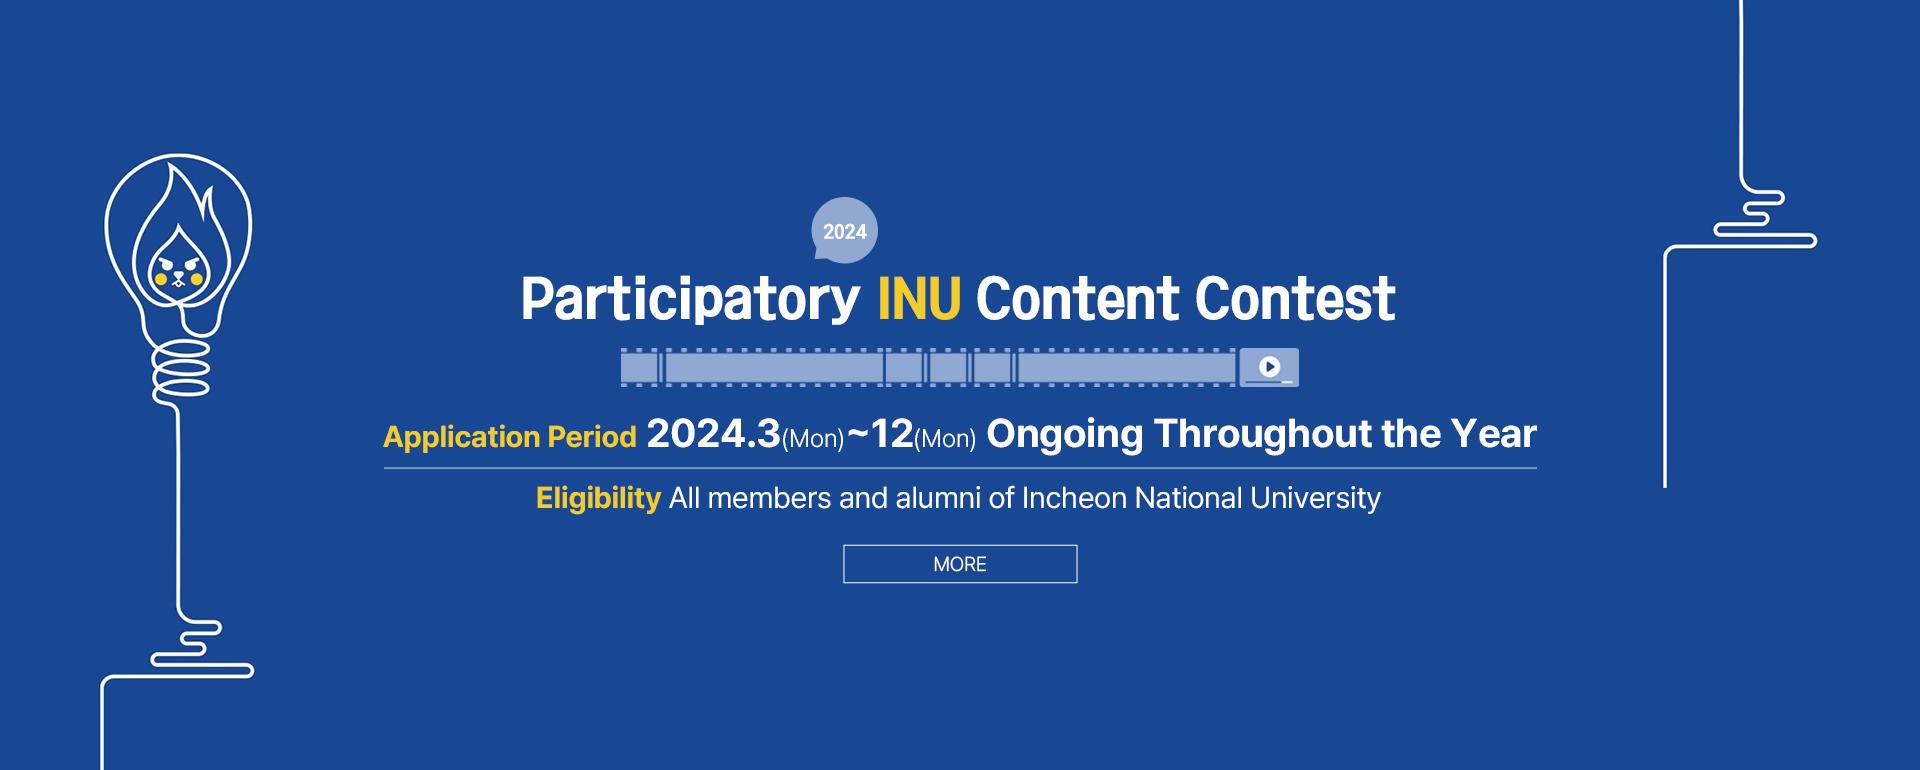 2024 Participatory INU Content Contest, Application Period 2024.3(Mon)~12(Mon) Ongoing Throughout the Year, Eligibility All members and alumni of Incheon National University, MORE